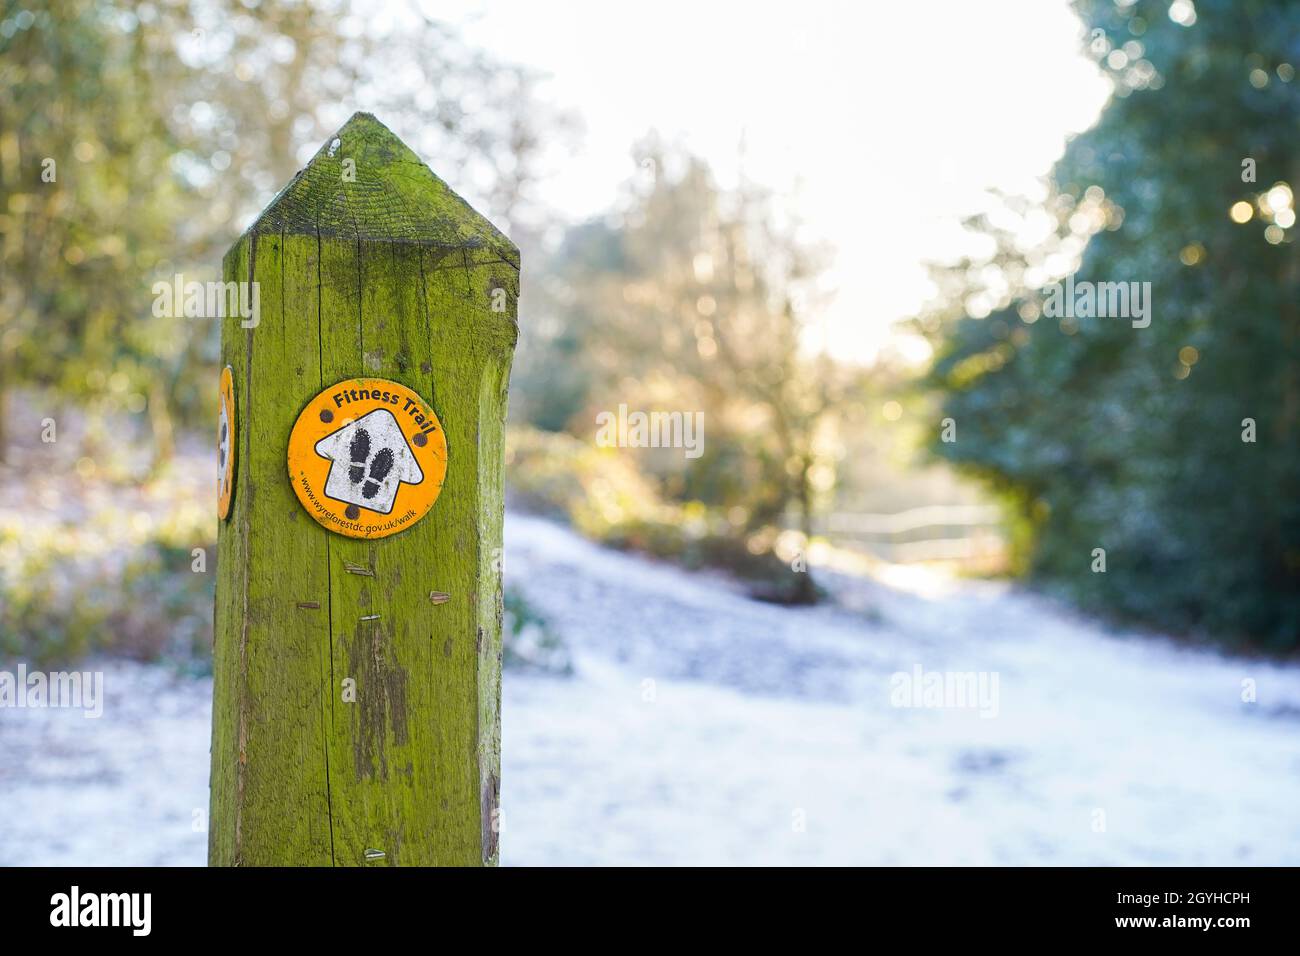 Fitness trail sign for ramblers isolated in winter countryside woodland, UK, with light snow on ground. Stock Photo